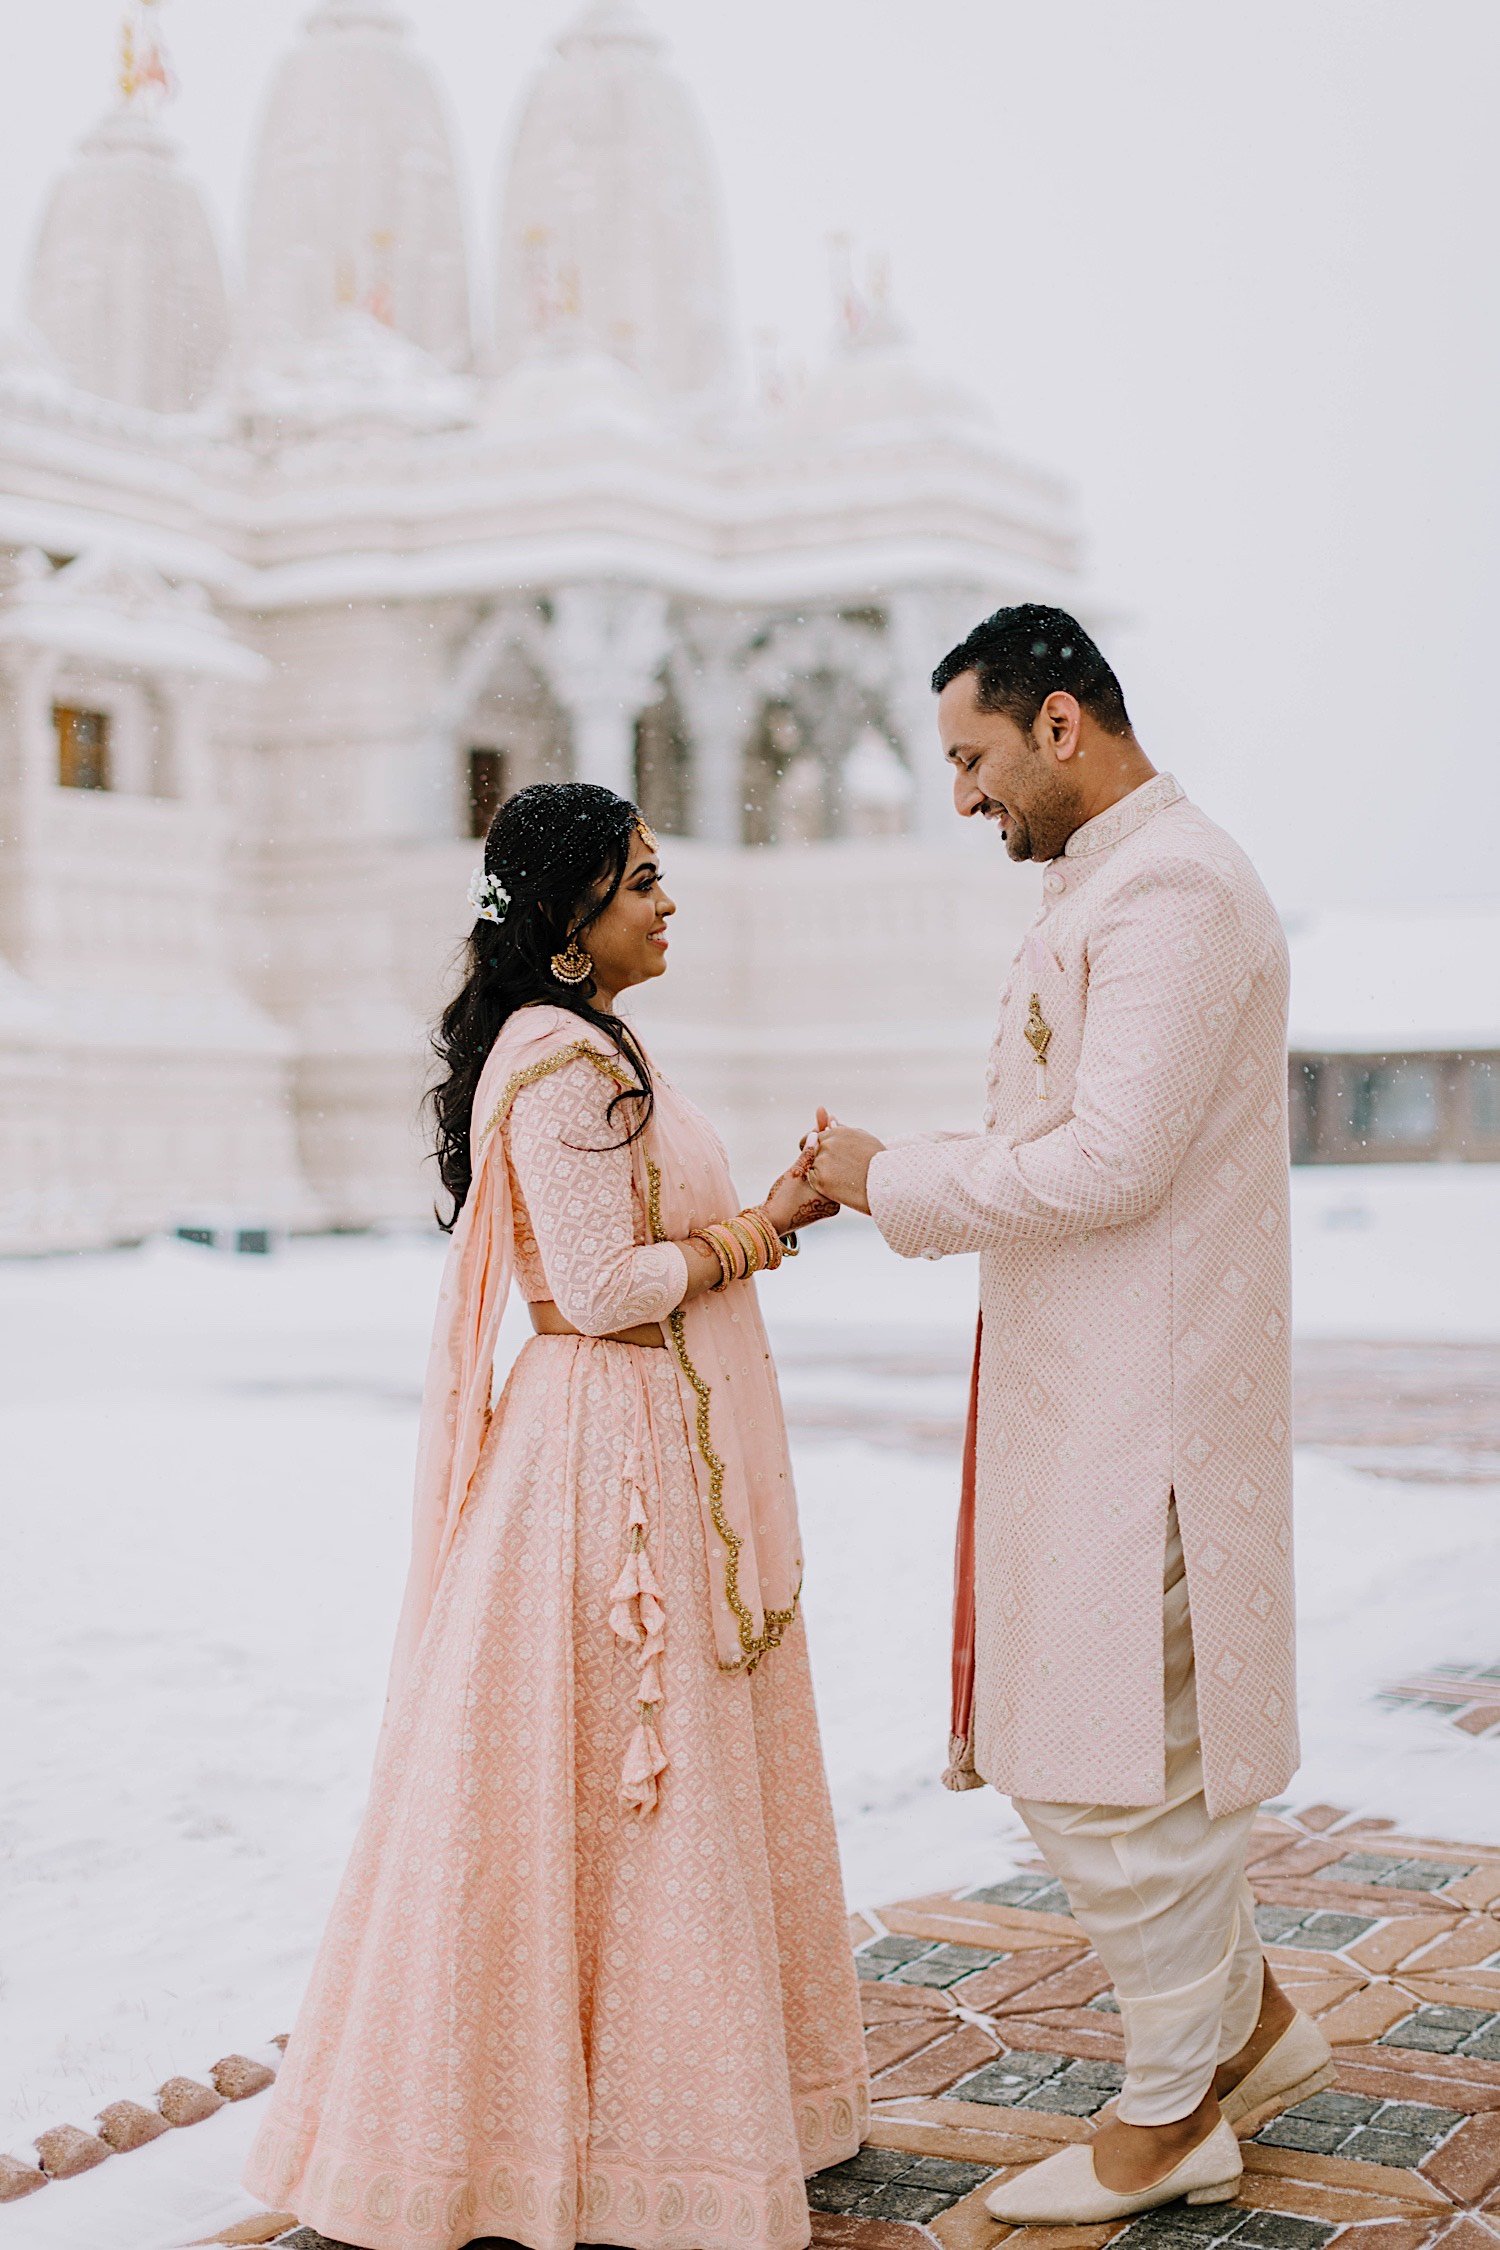 Couple hold hands and smile at one another while wearing traditional Indian wedding attire with snow falling around them